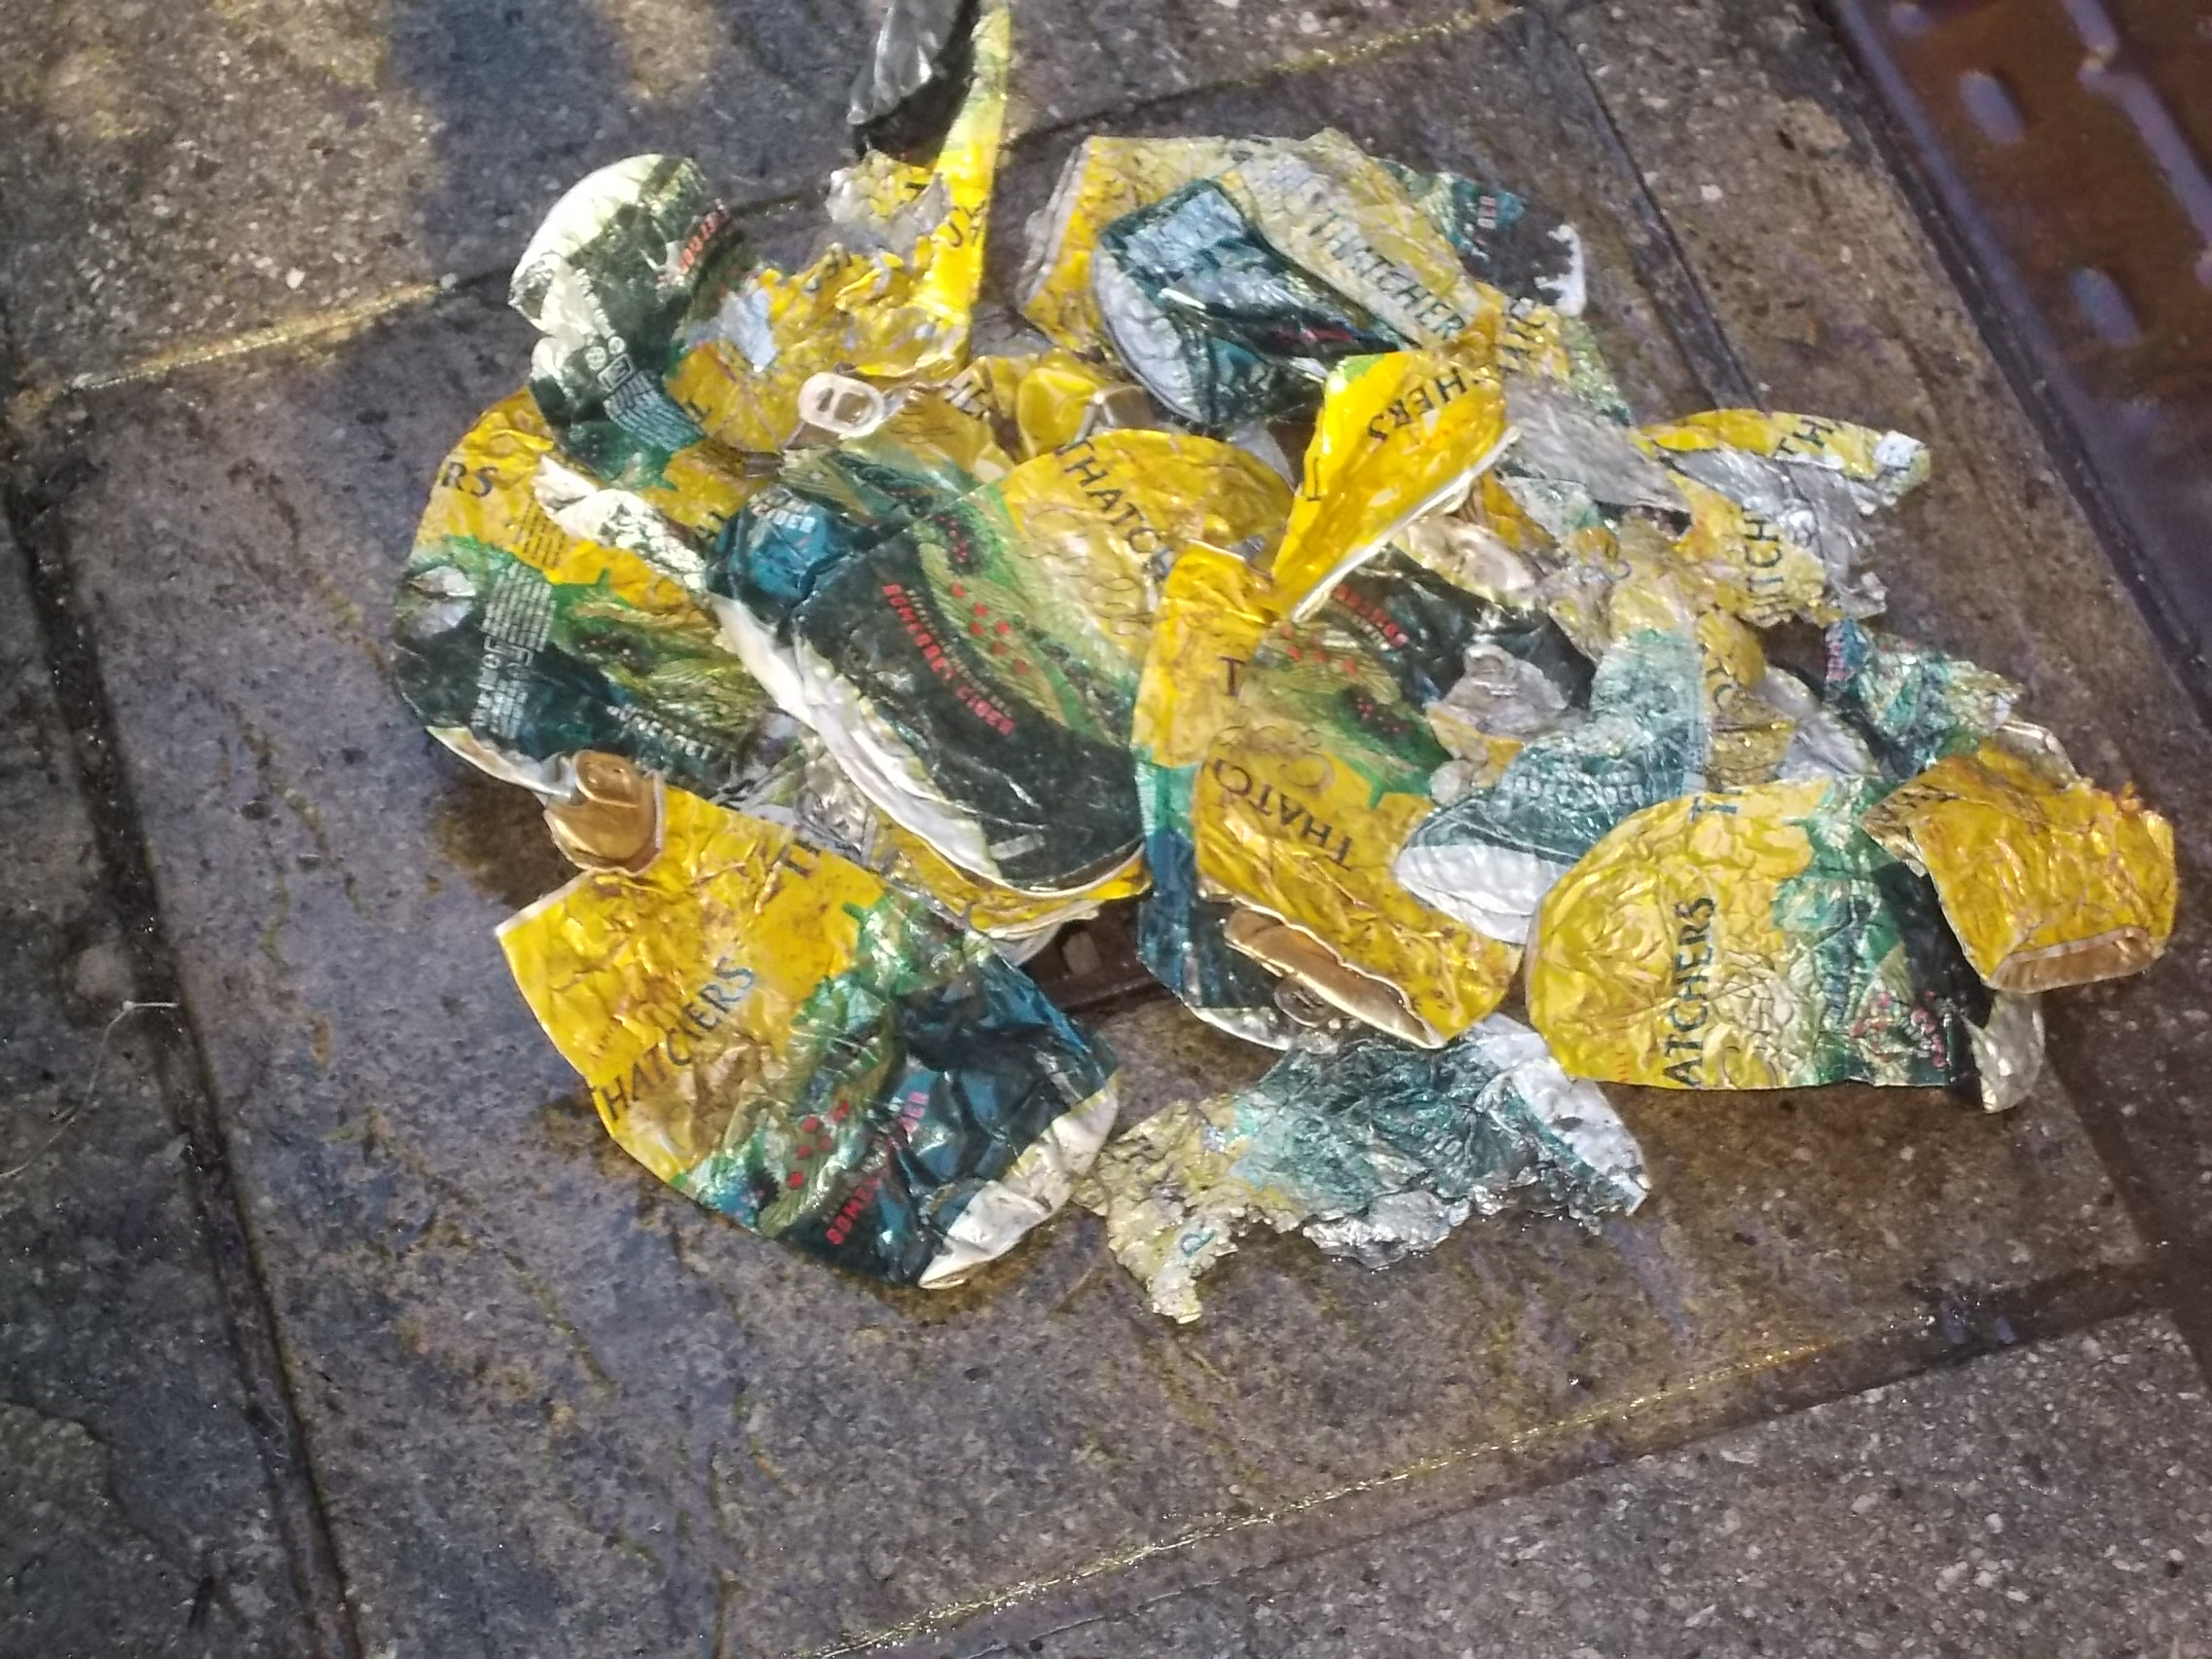 A pile of cider cans which had been litterpicked